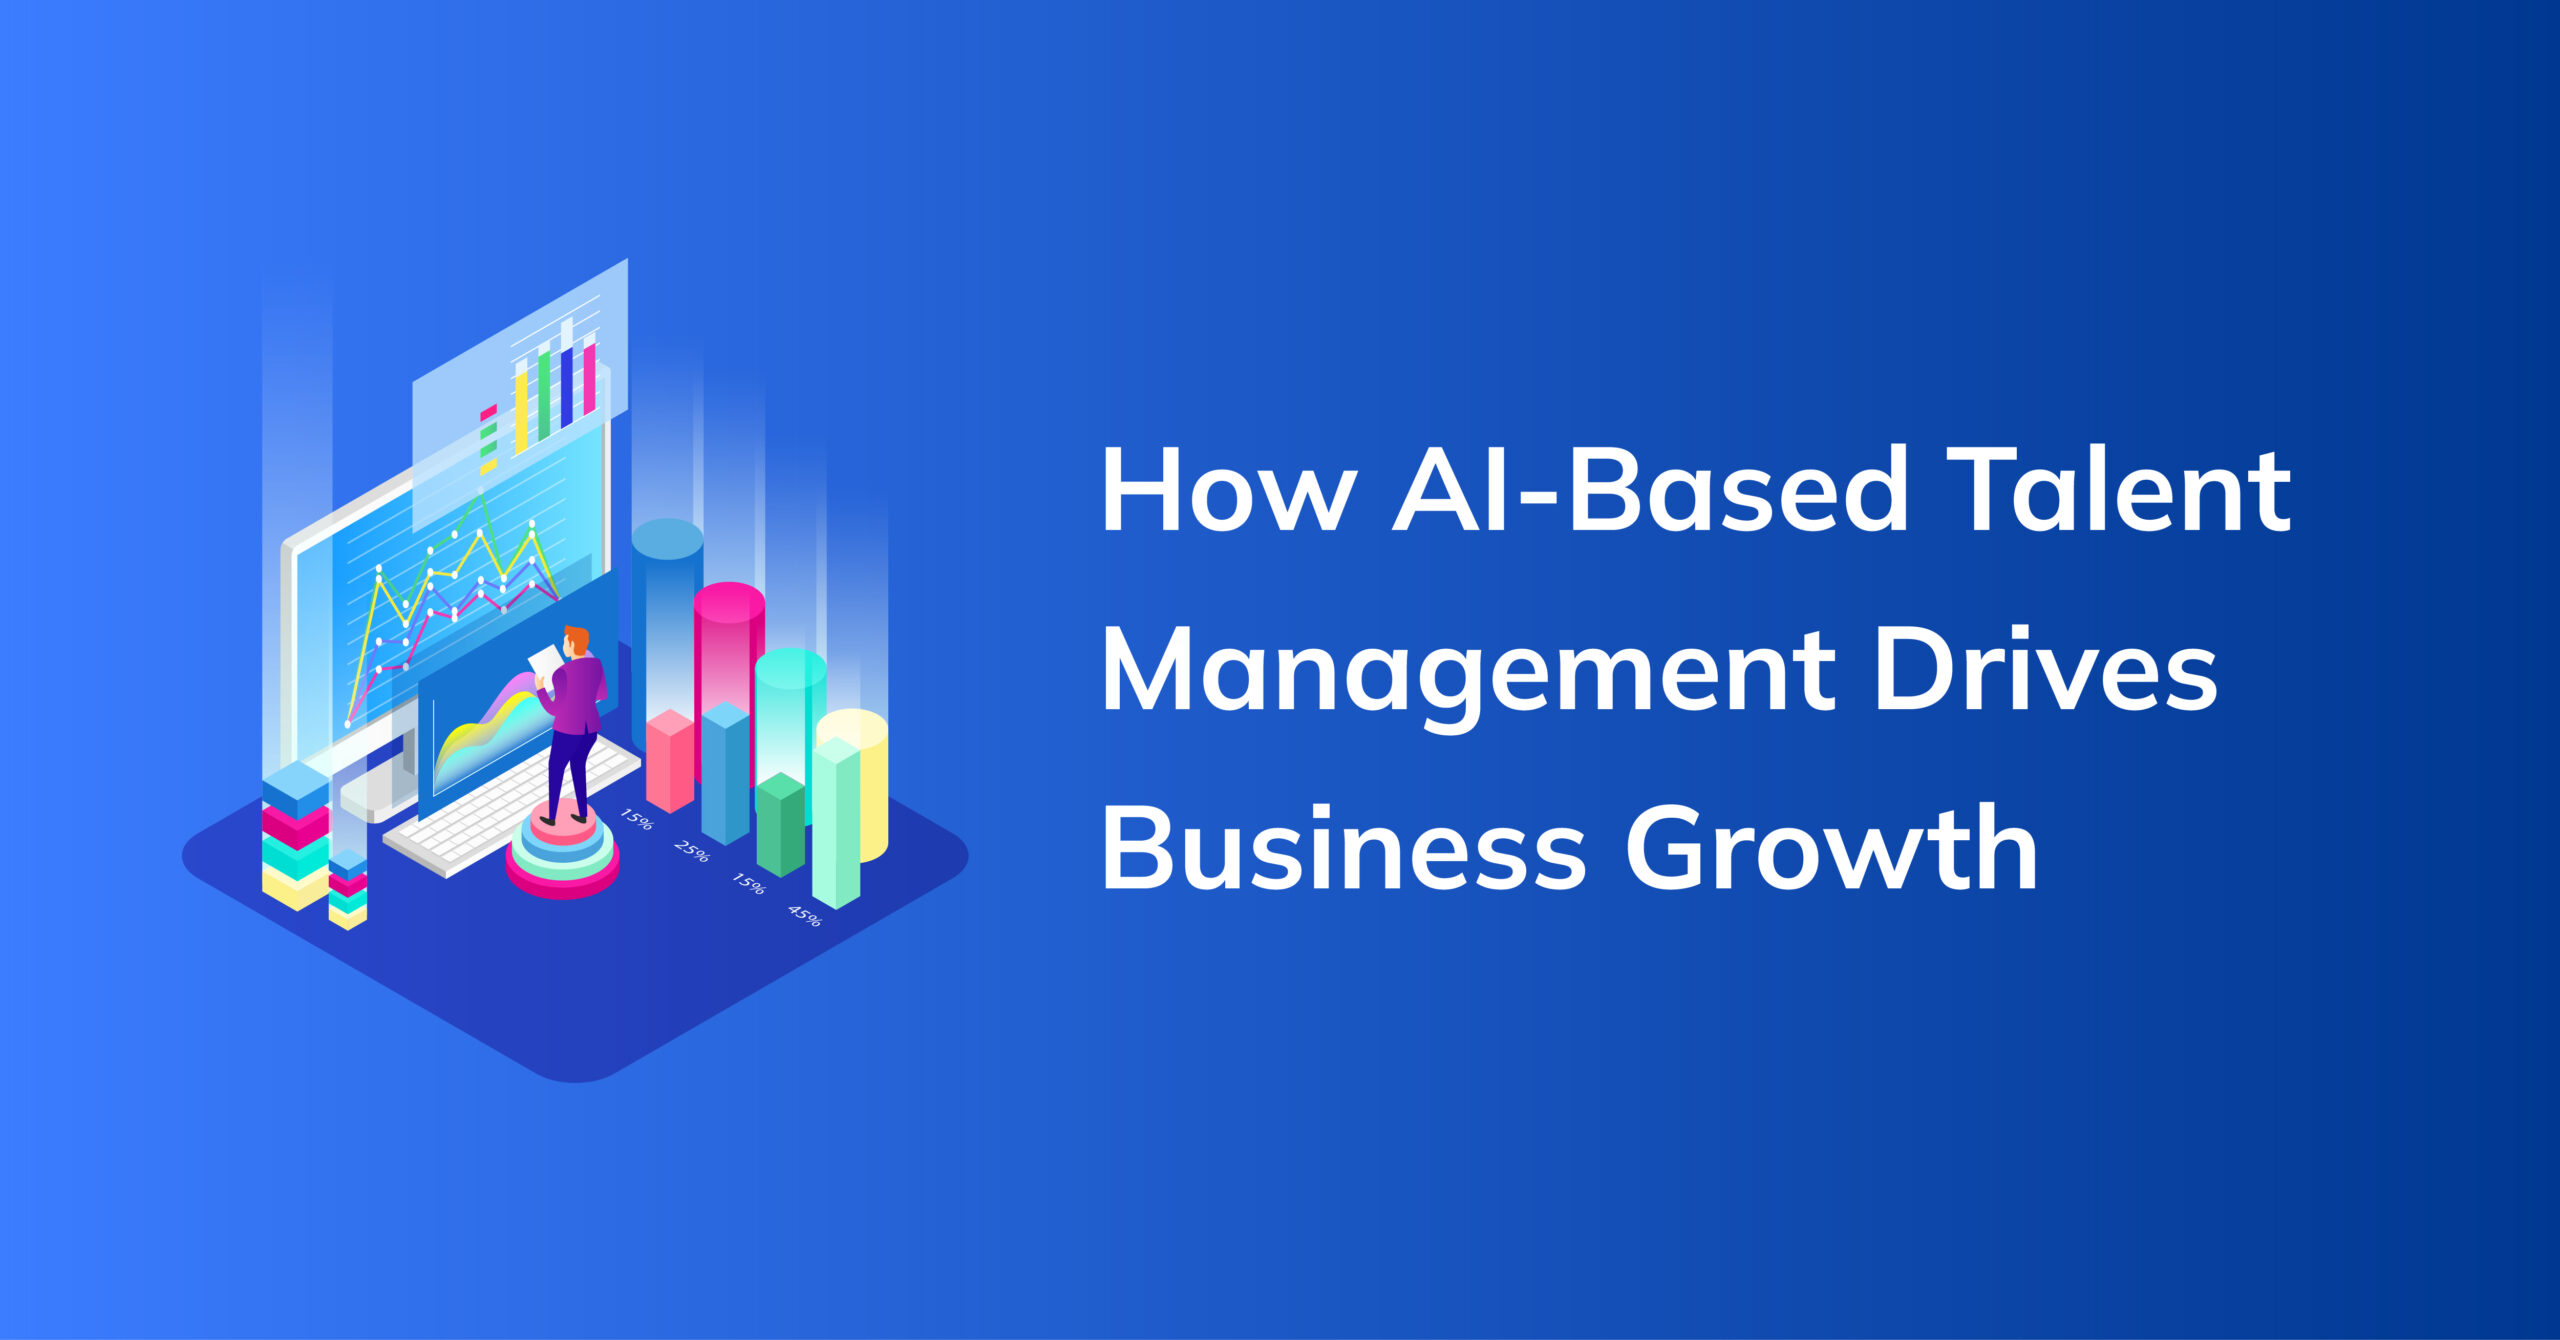 Aligning Talent with Strategy: How AI-Based Talent Management Drives Business Growth